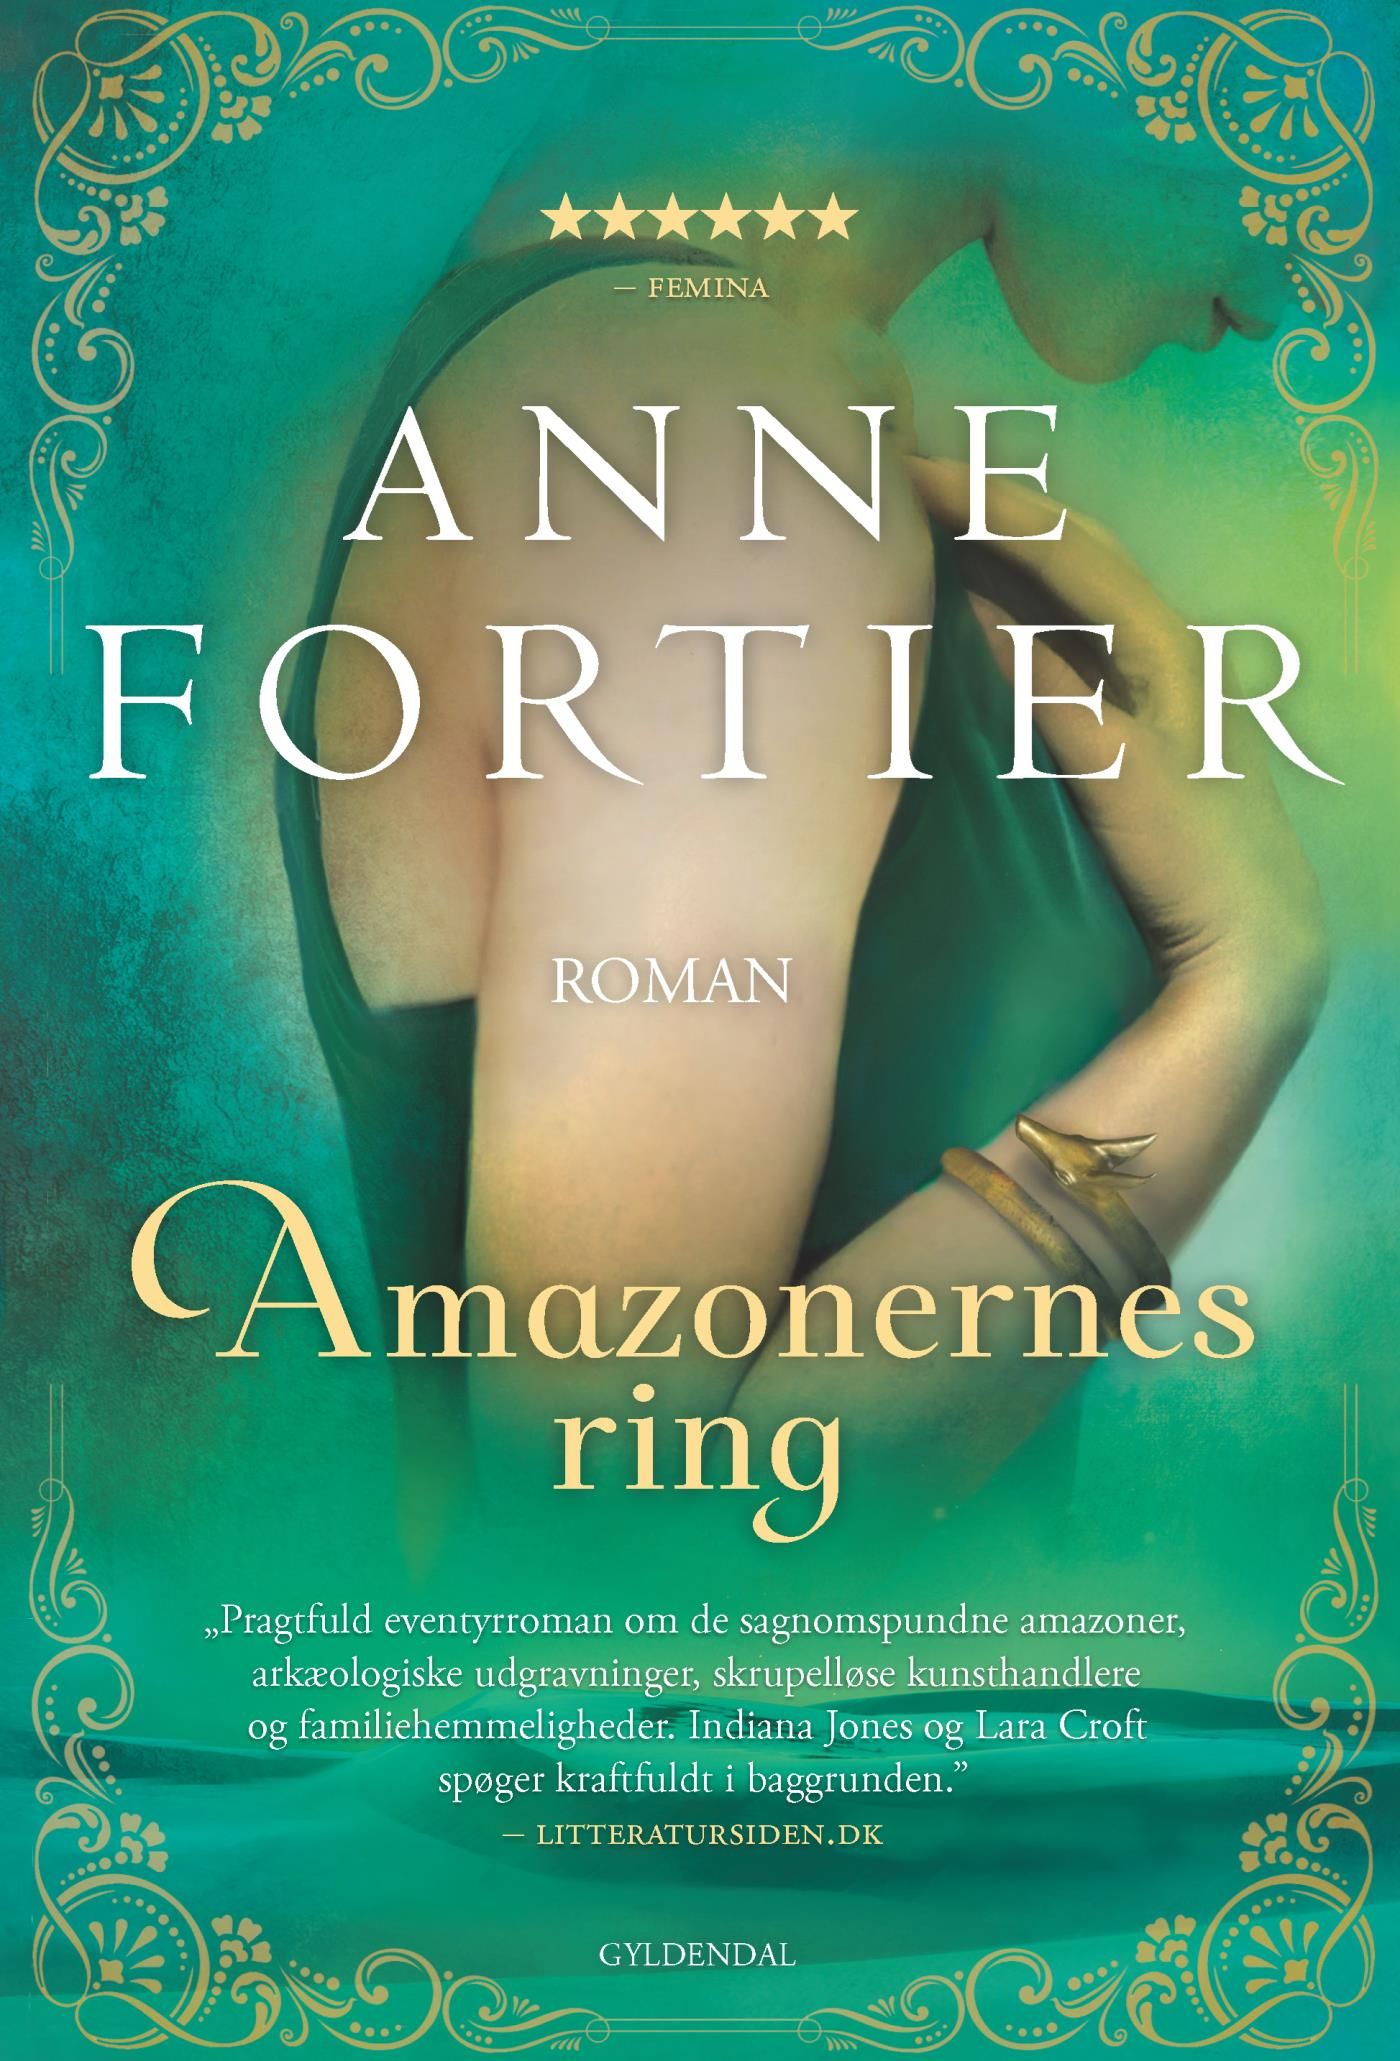 Amazonernes ring, eBook by Anne Fortier